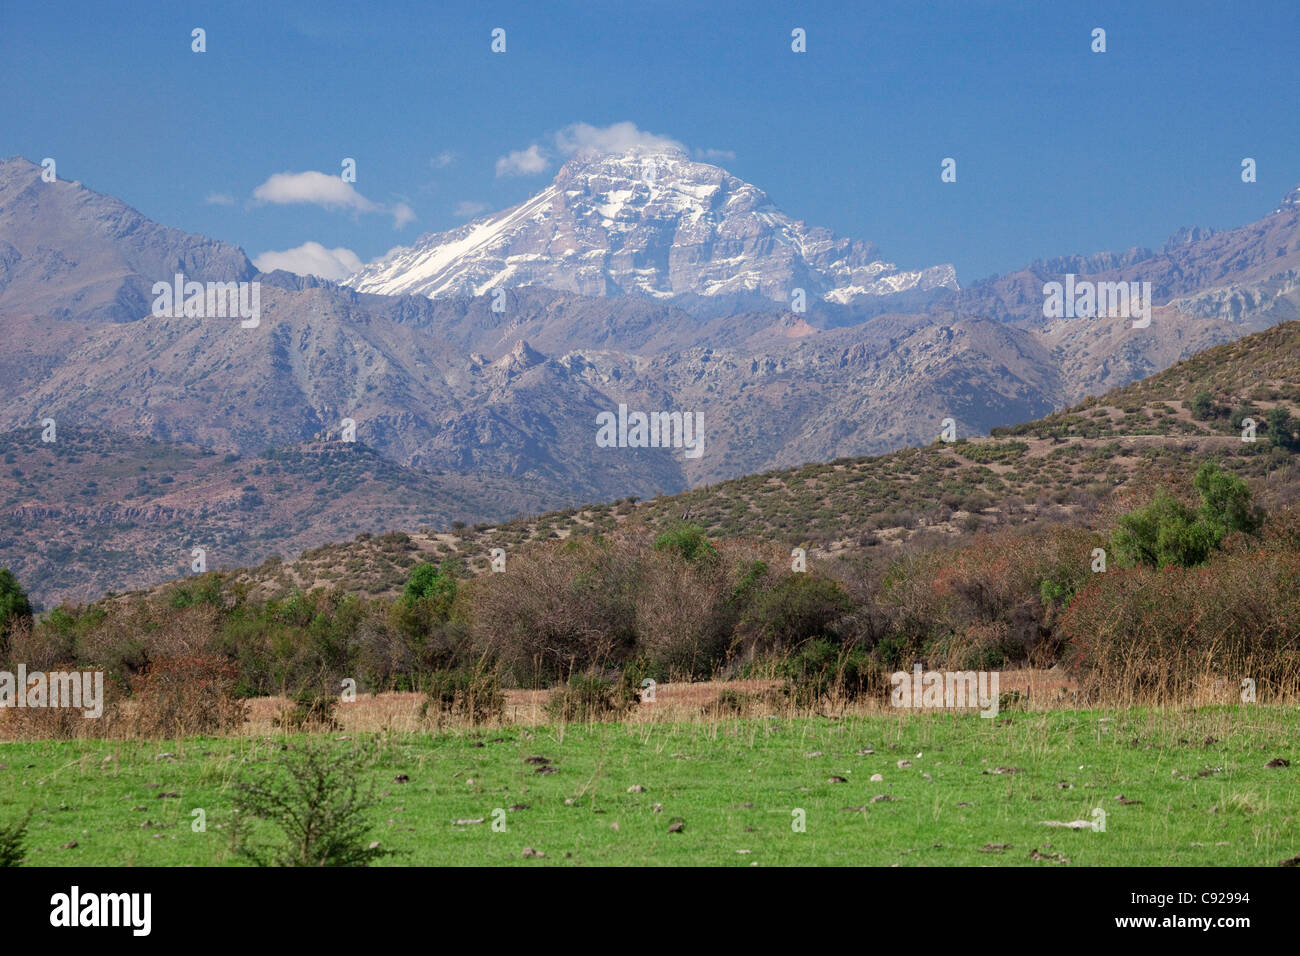 Chile, Los Andes, snowcapped mountain Stock Photo